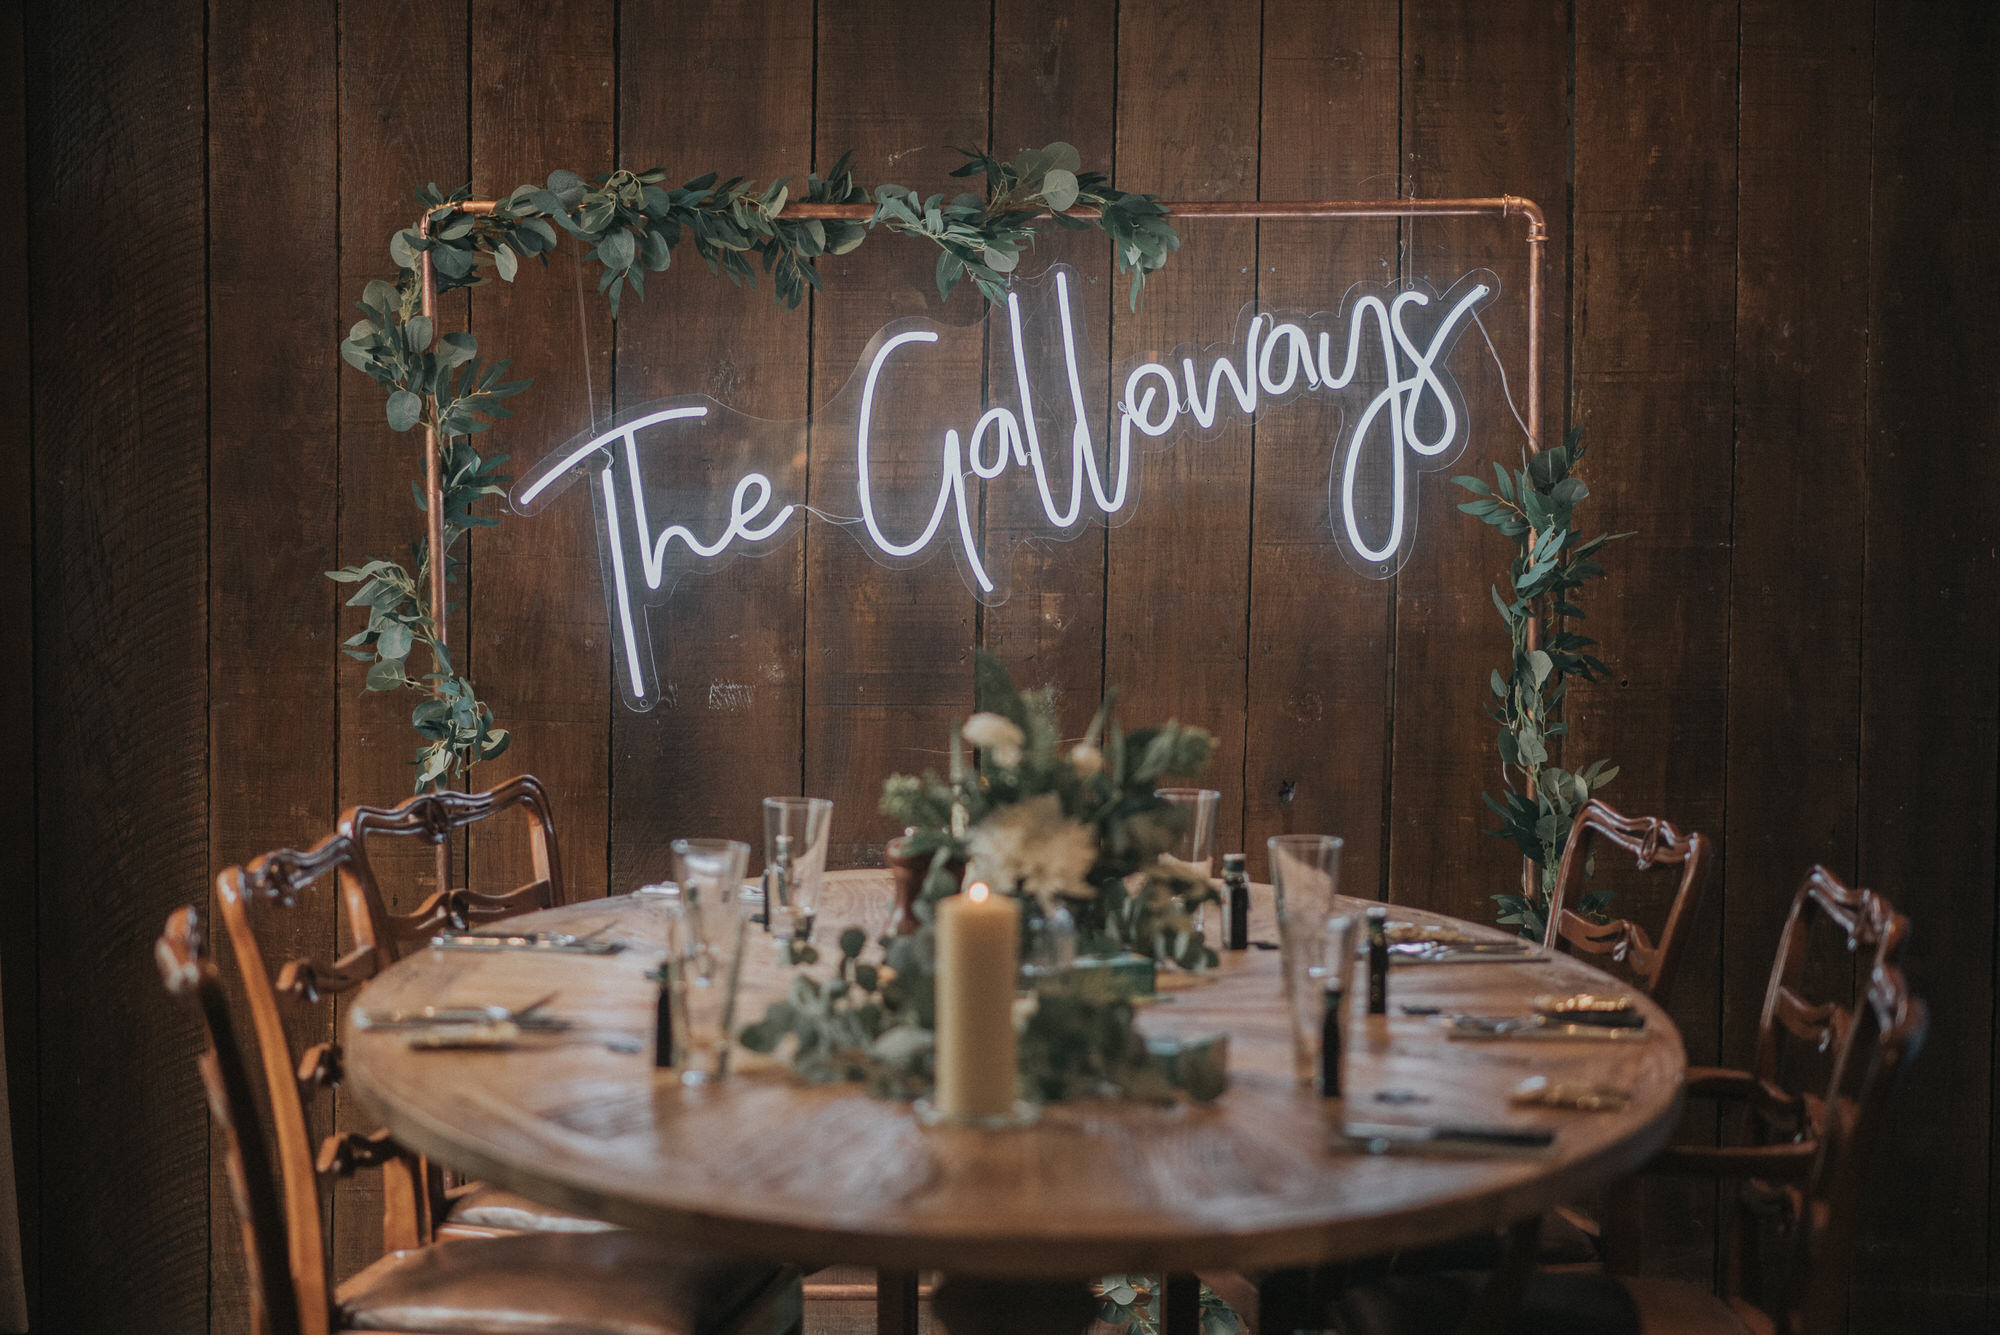 A neon sign that reads "The Galloways" at The Bothy, Glasgow